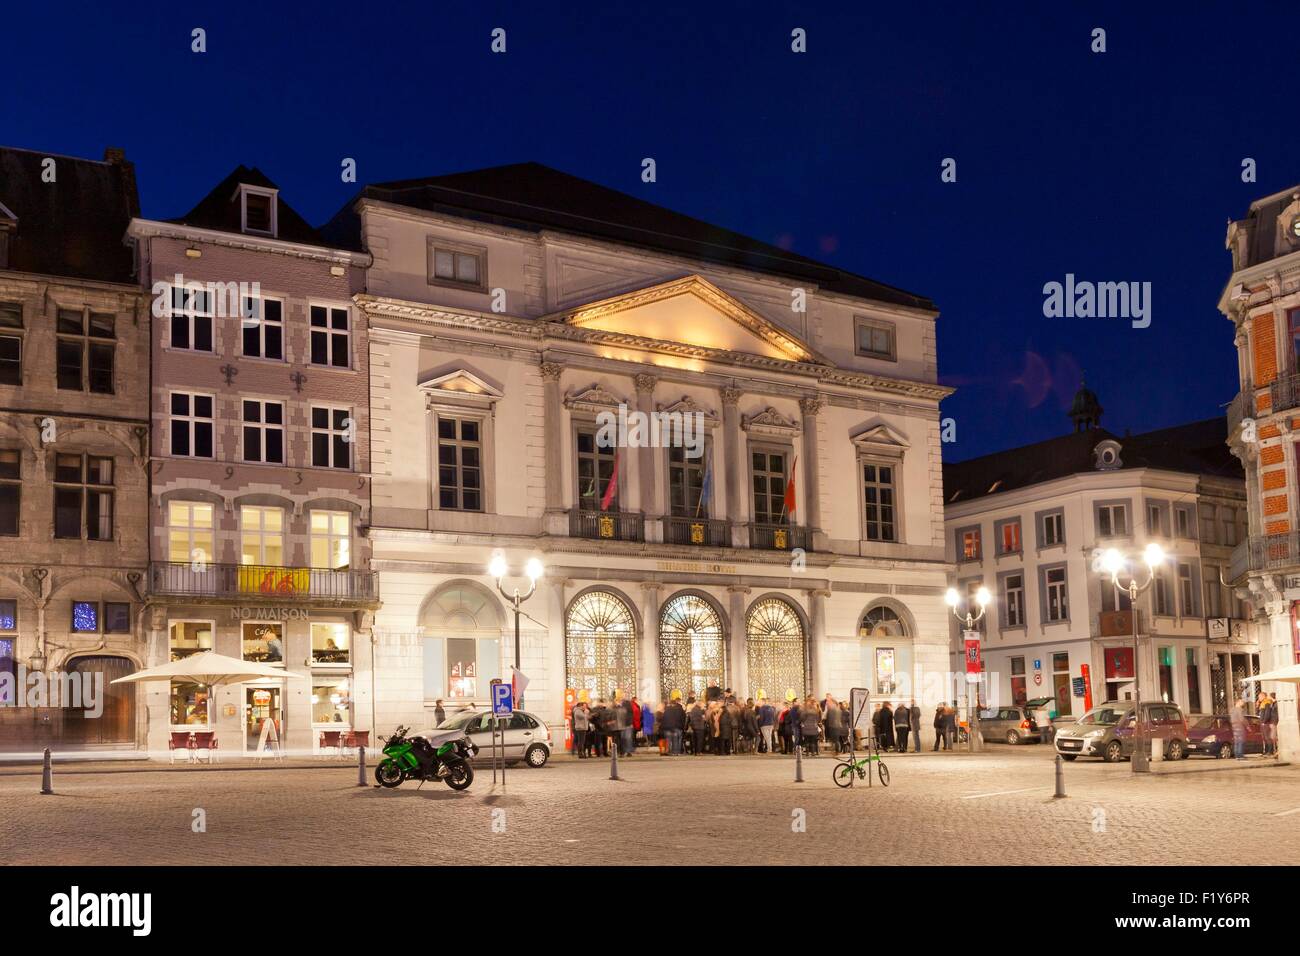 Belgium, Wallonia, Hainaut province, Mons, European Capital of Culture 2015, historical center, grand place and Theatre Royal Stock Photo